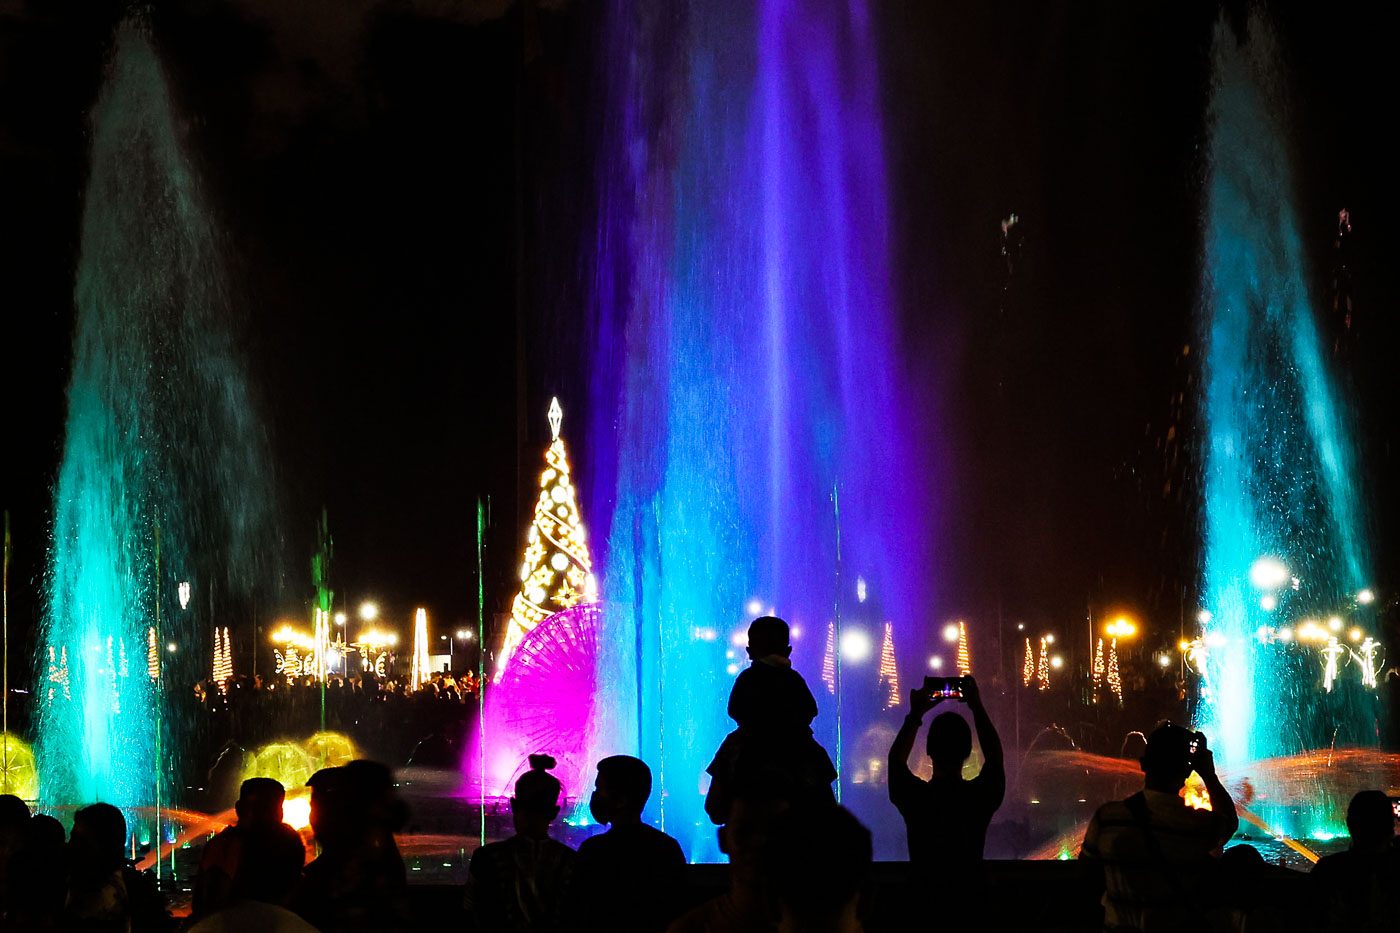 IN PHOTOS: Let there be (Christmas) lights